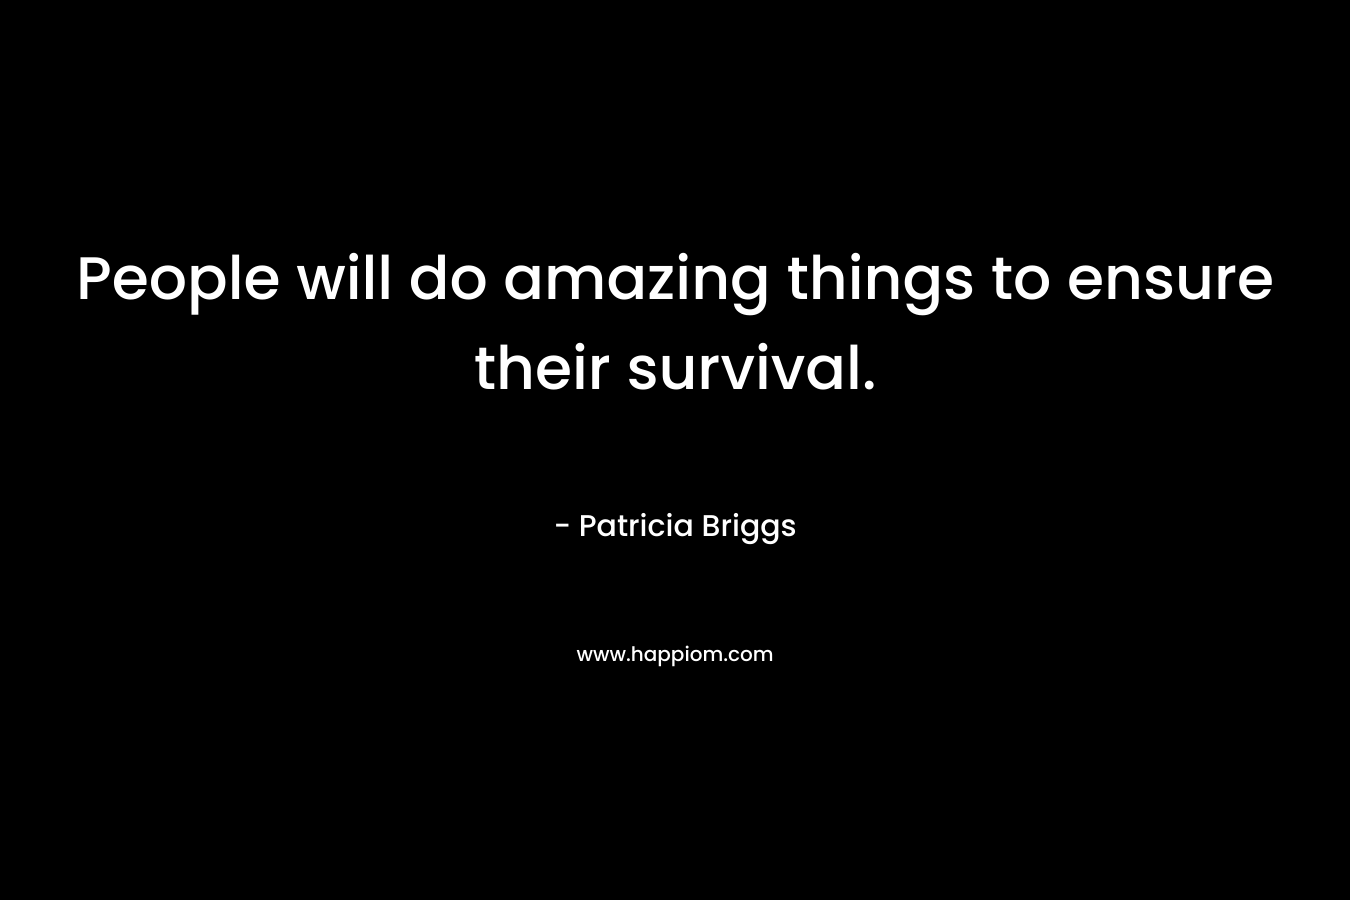 People will do amazing things to ensure their survival.